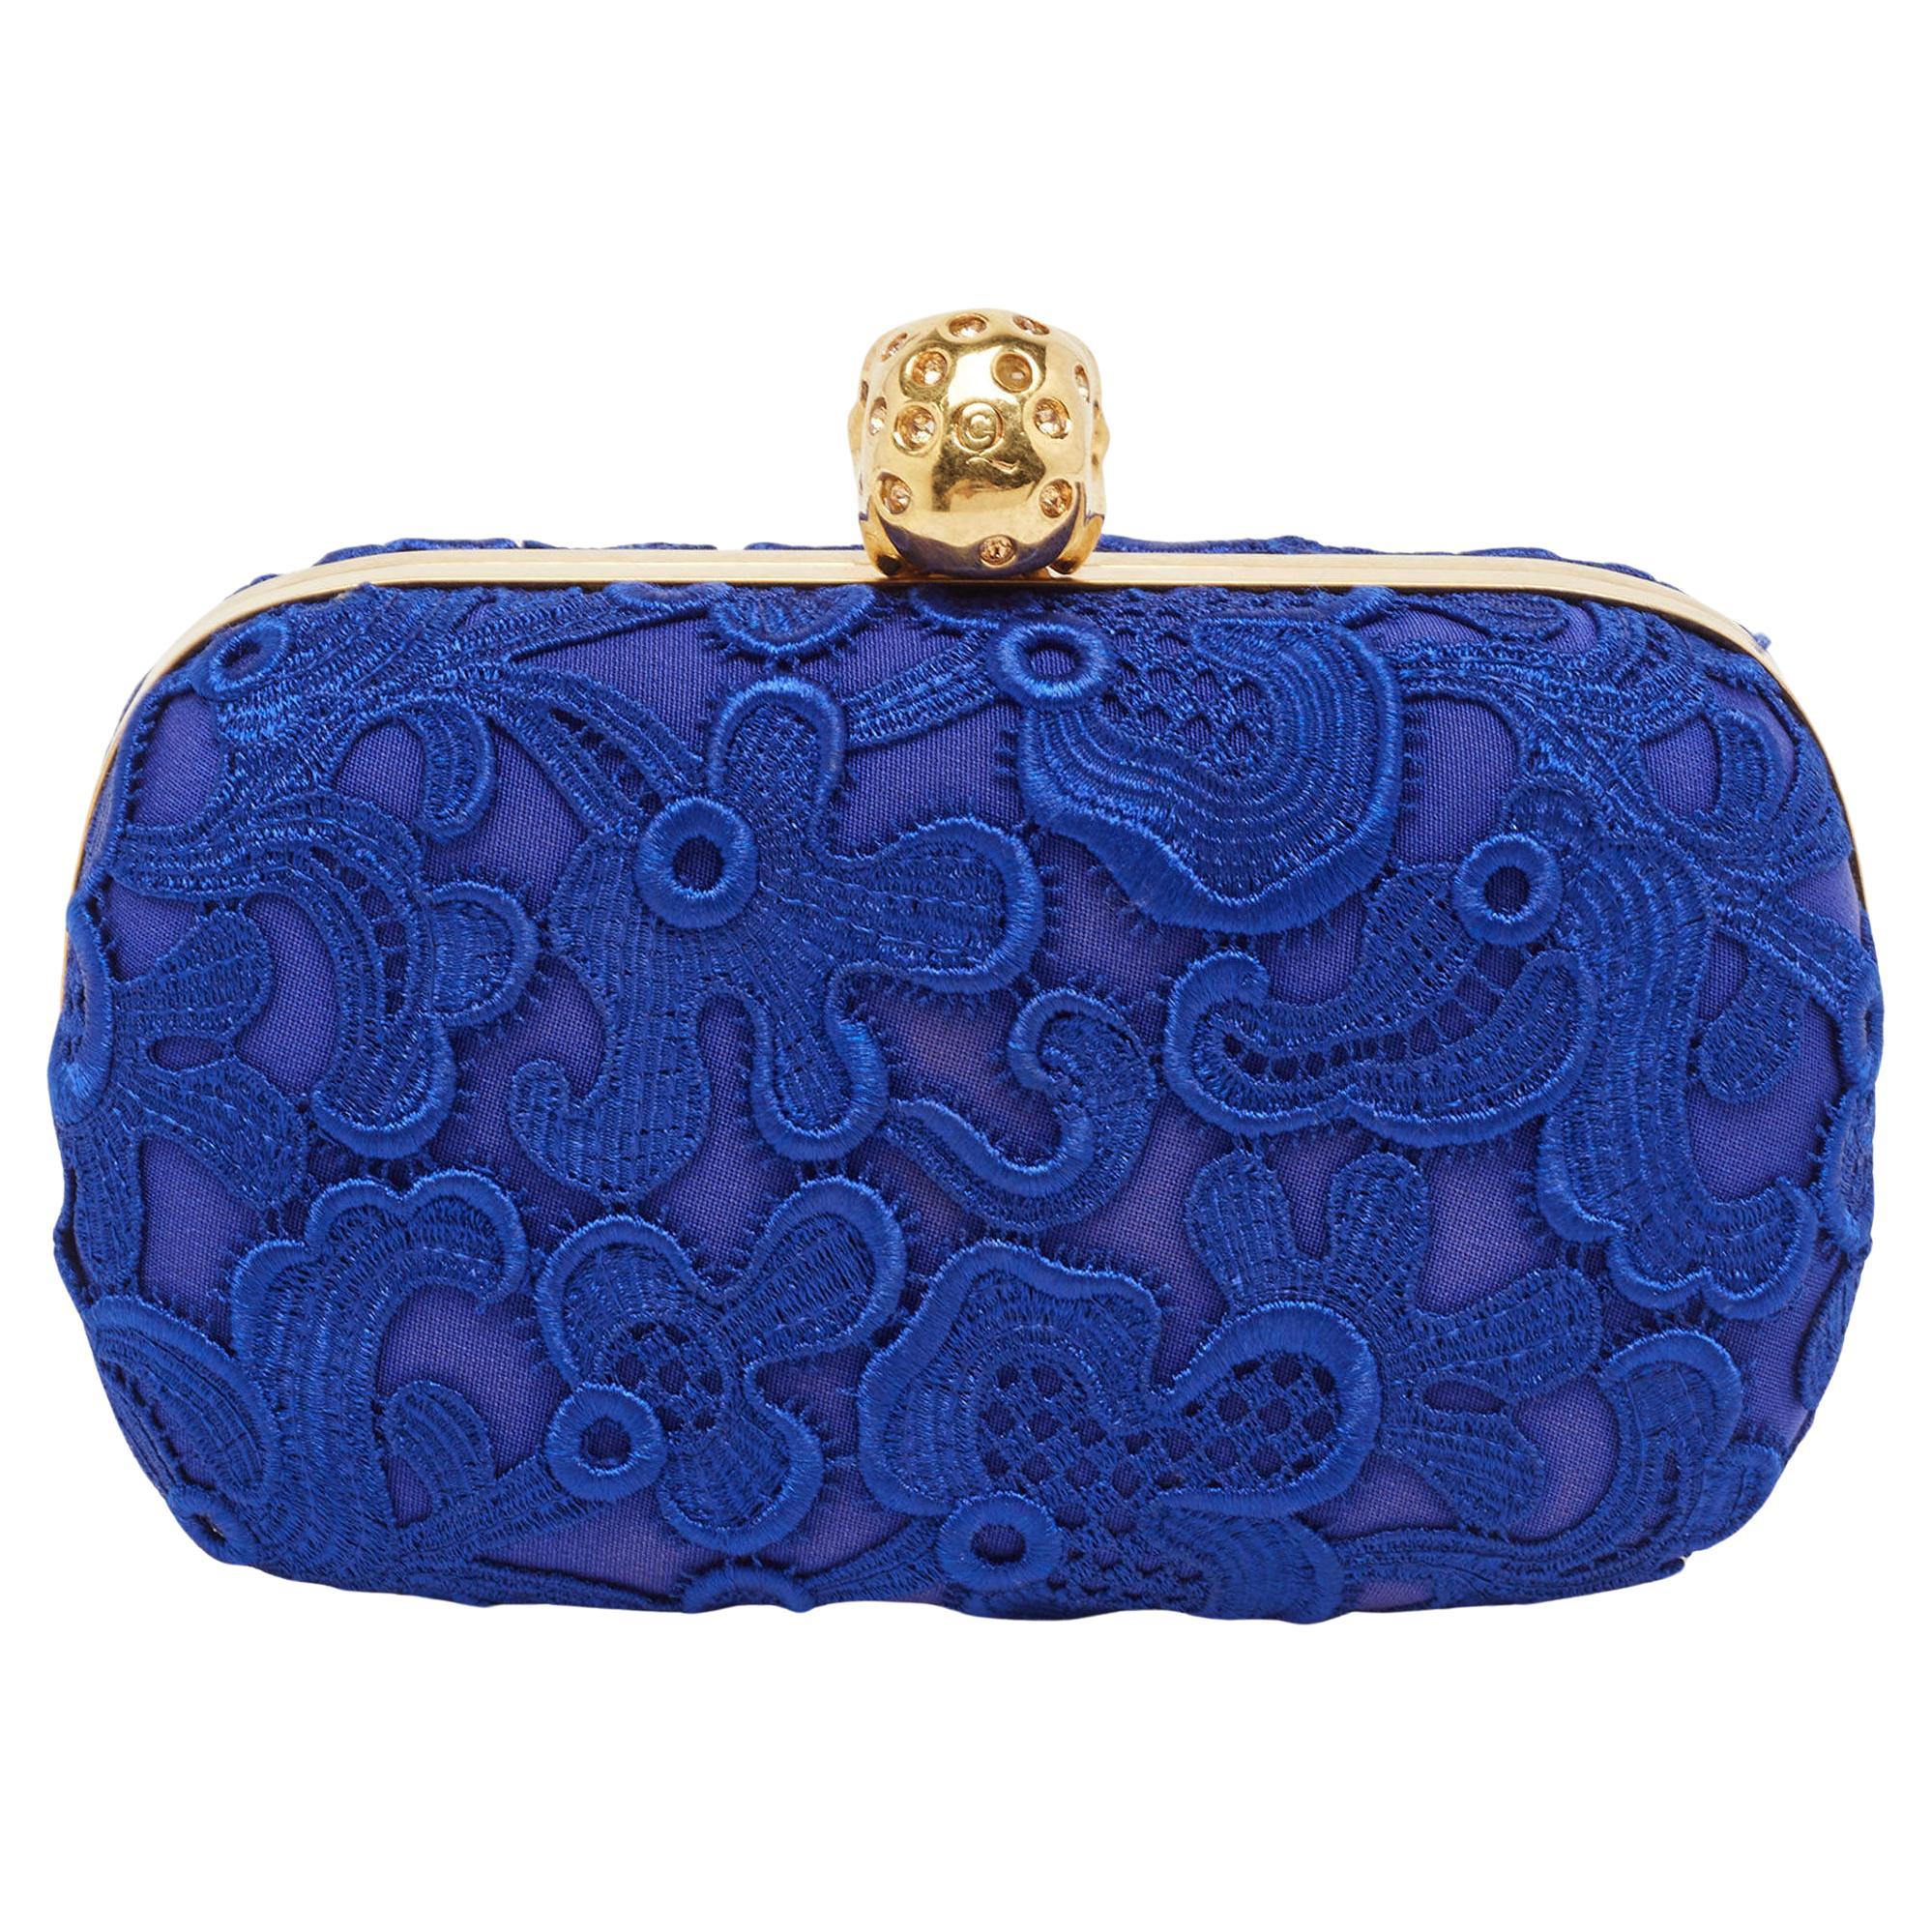 Alexander McQueen Blue Floral Lace Skull Box Clutch For Sale